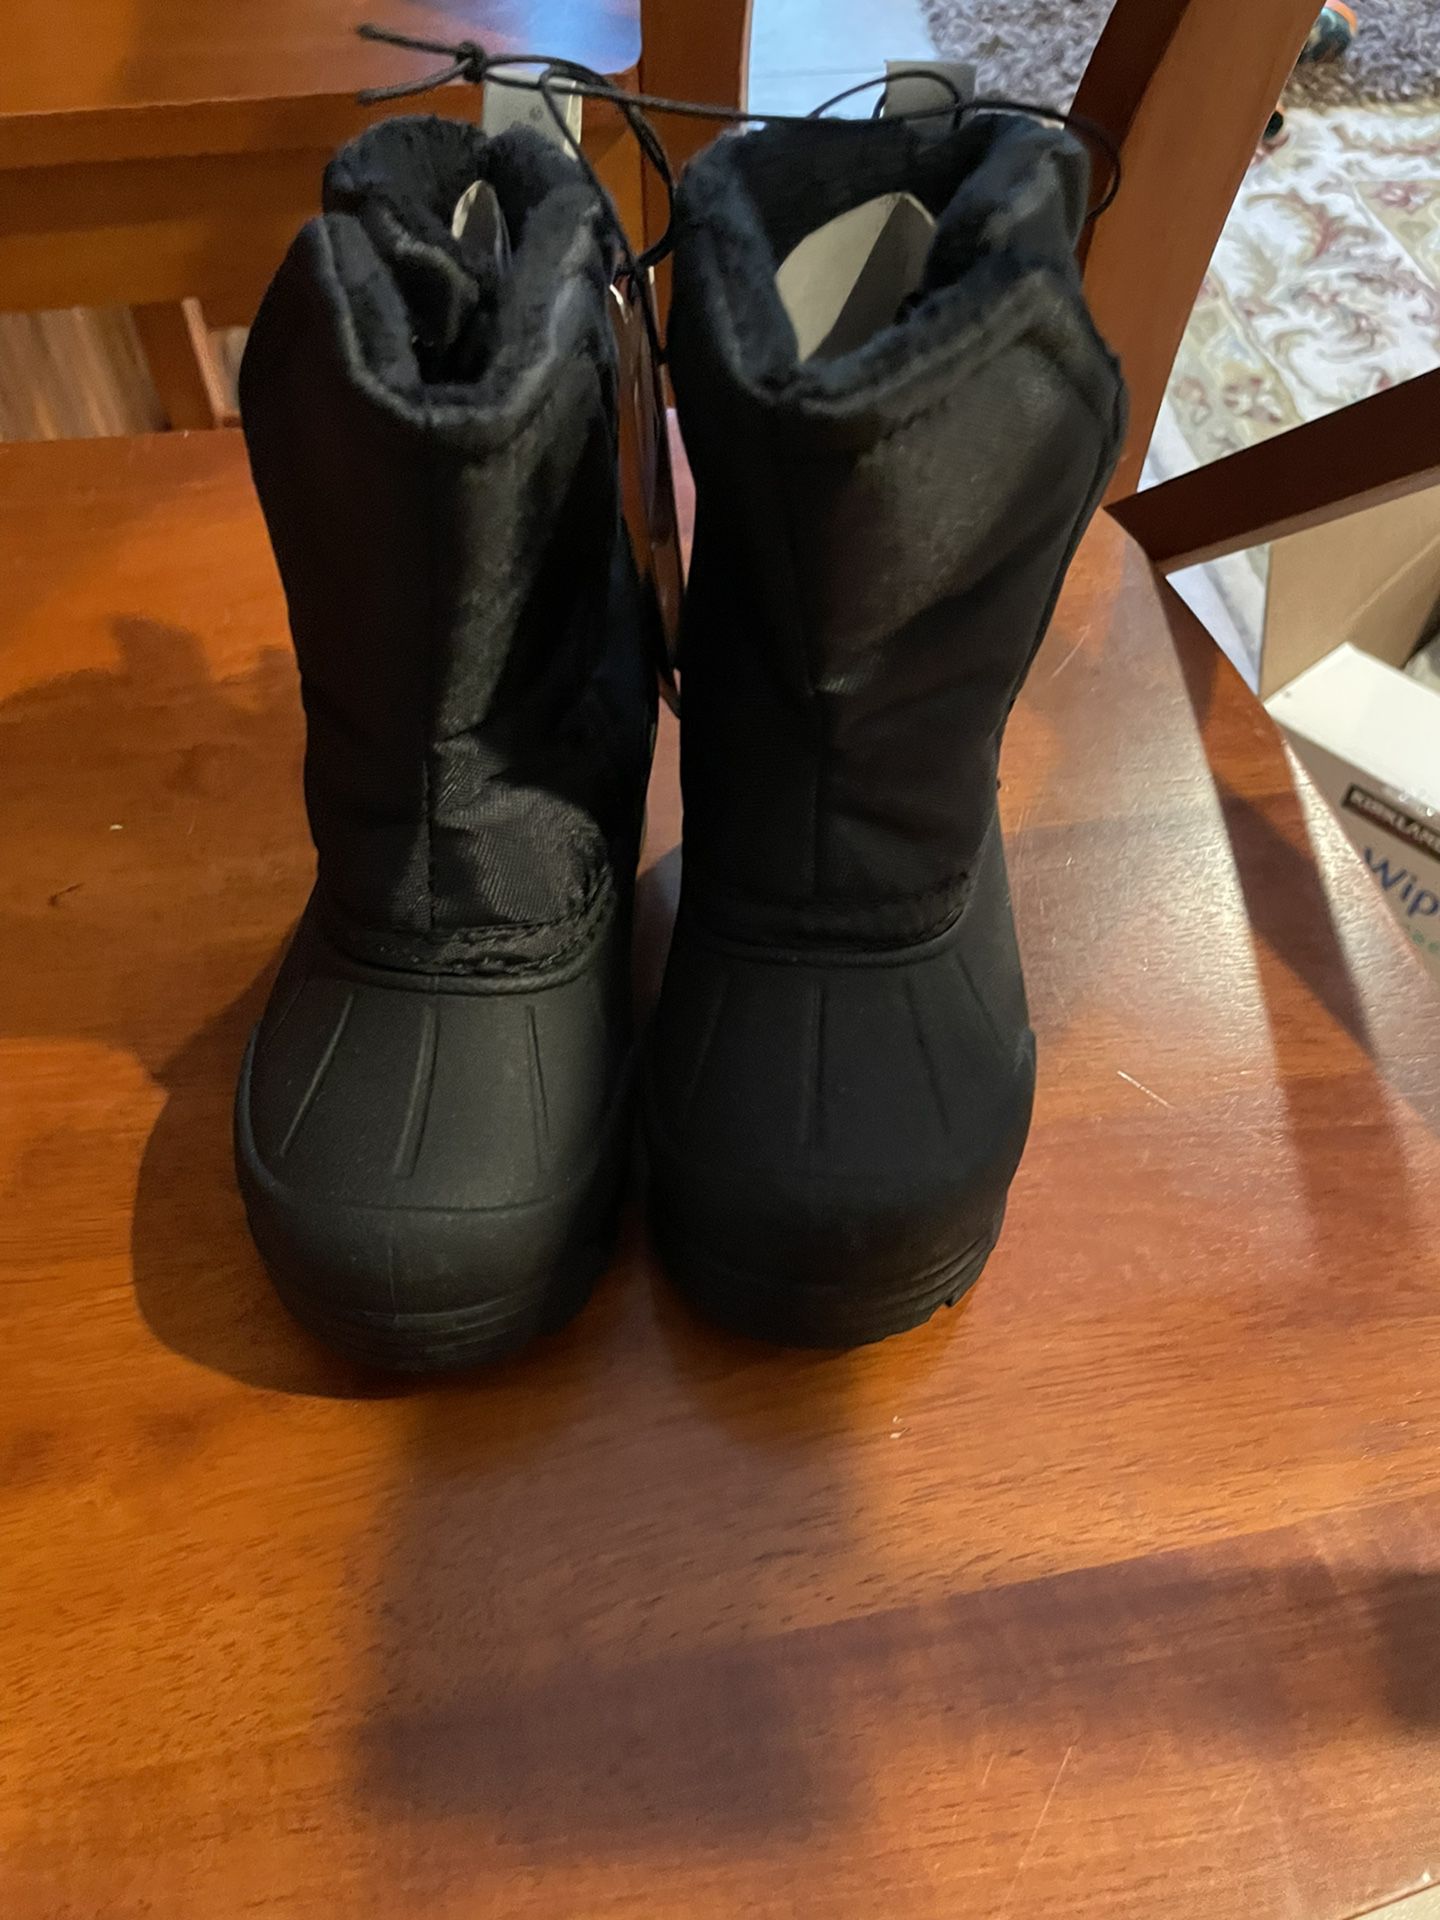 Snow Boots - Kids/toddler Size 6 & 9